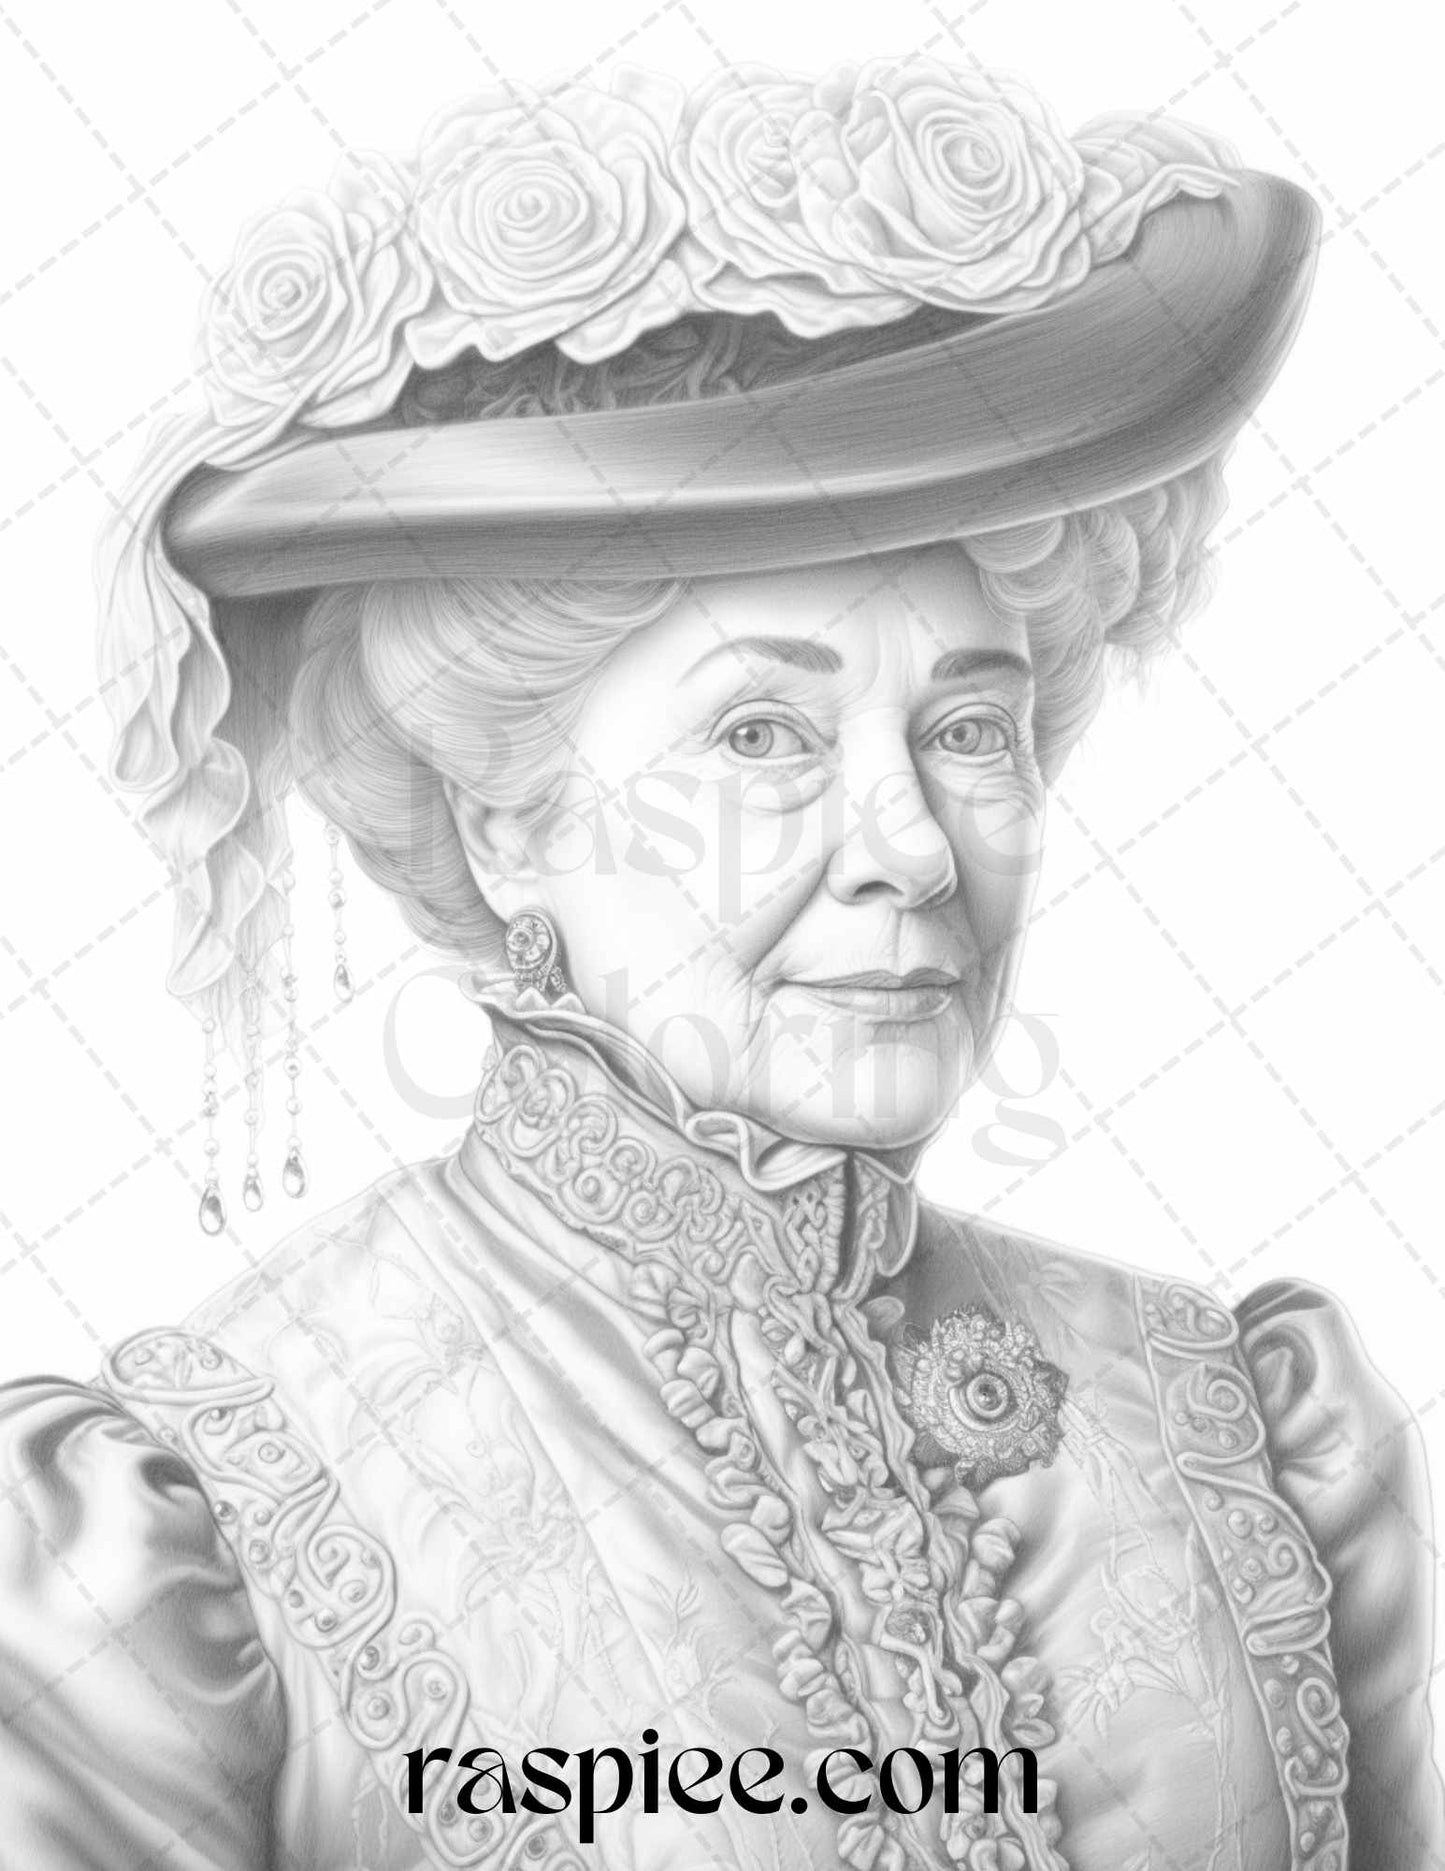 Victorian Grandma Grayscale Coloring Pages, Printable Coloring Pages for Adults, Grayscale Art for Coloring, Vintage Black and White Illustrations, Portrait Coloring Pages for Adults